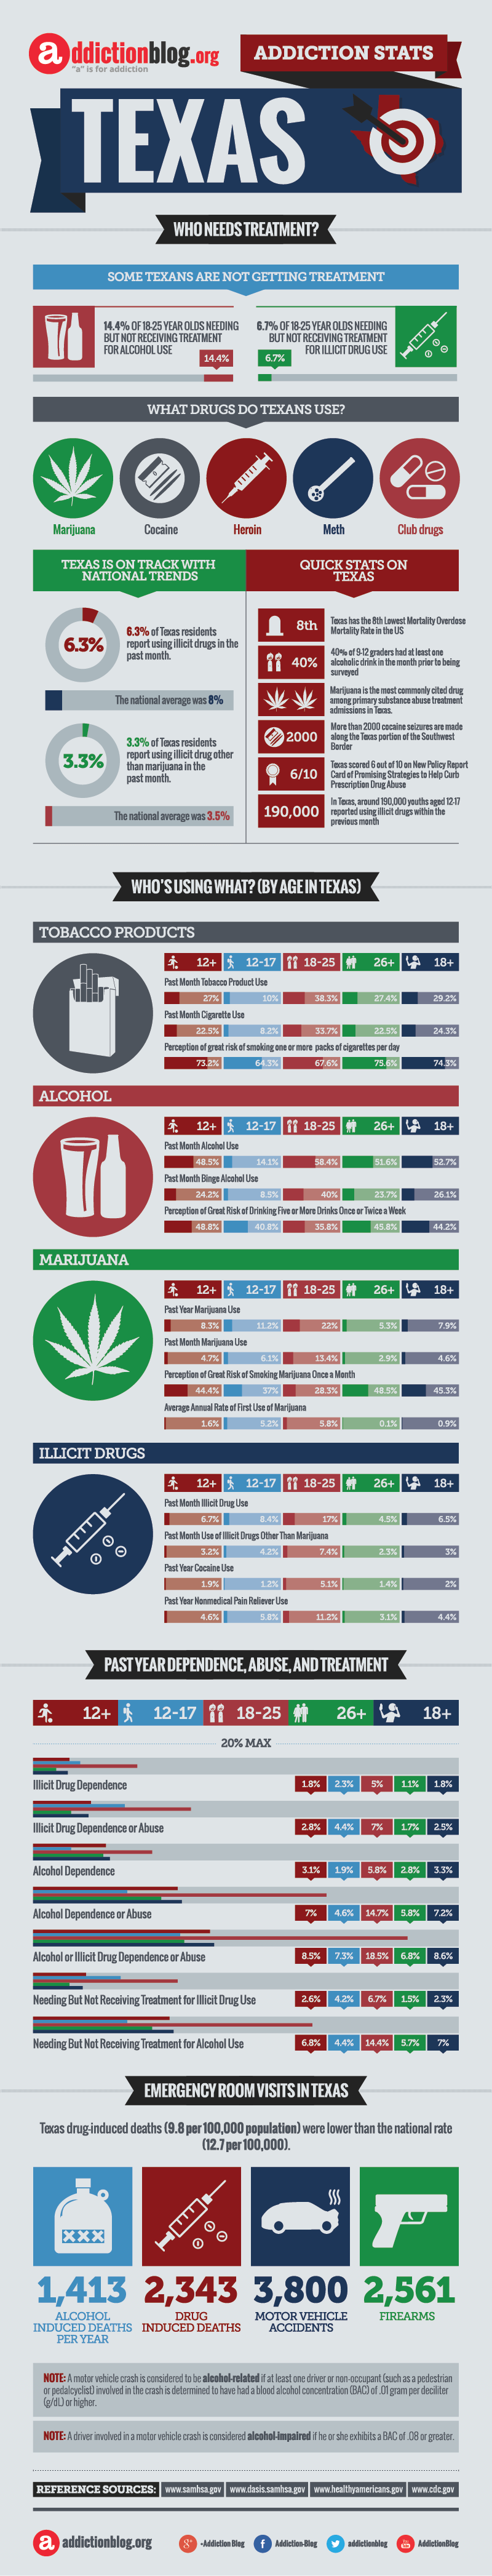 Who needs rehab in Texas? (INFOGRAPHIC)